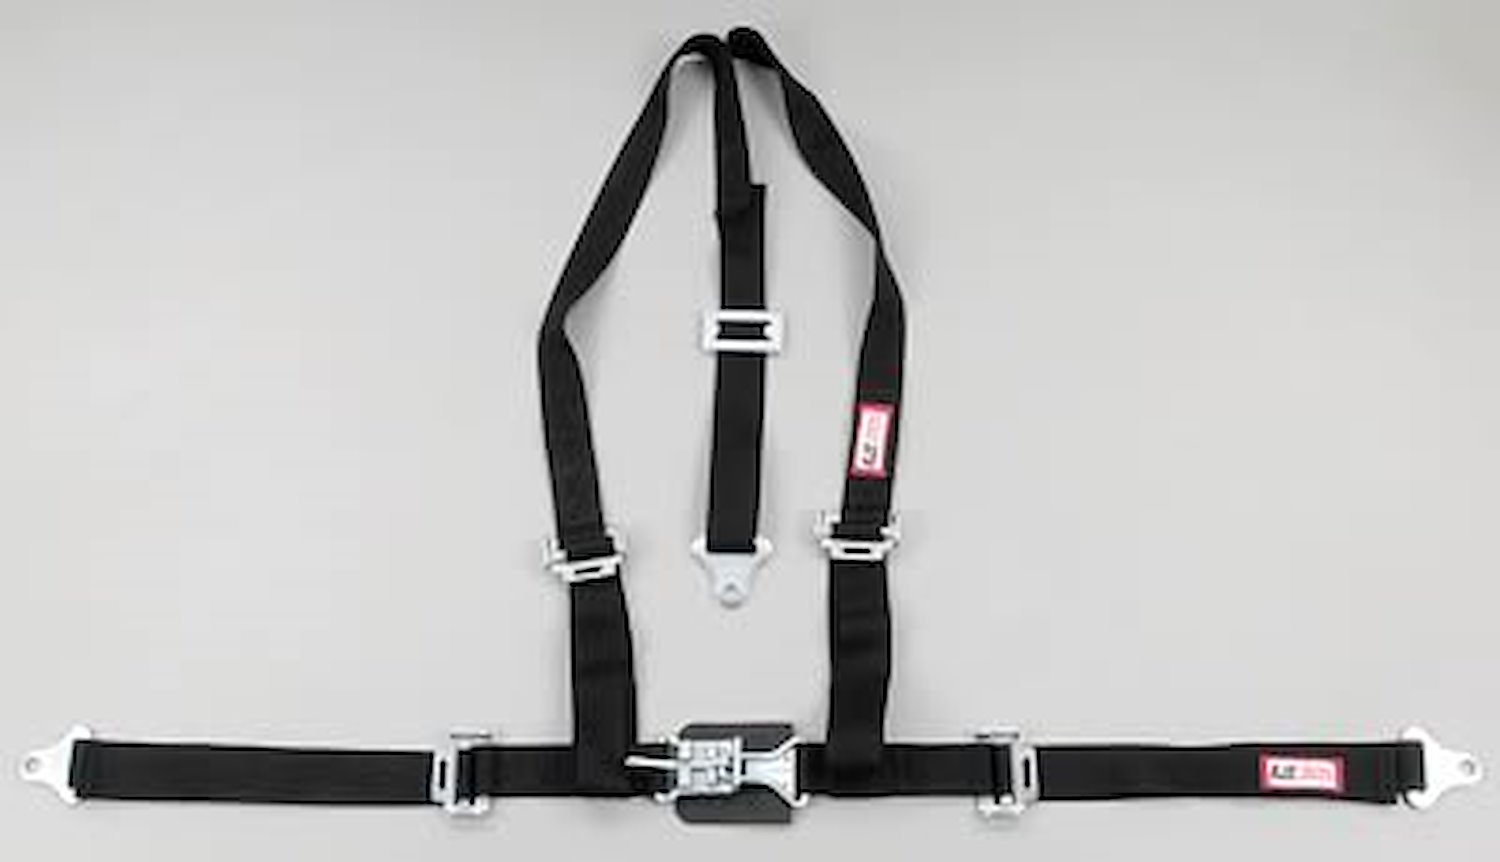 NON-SFI L&L HARNESS 3 PULL UP Lap Belt SNAP SEWN IN 2 S.H. Individual FLOOR Mount WRAP/SNAP PURPLE